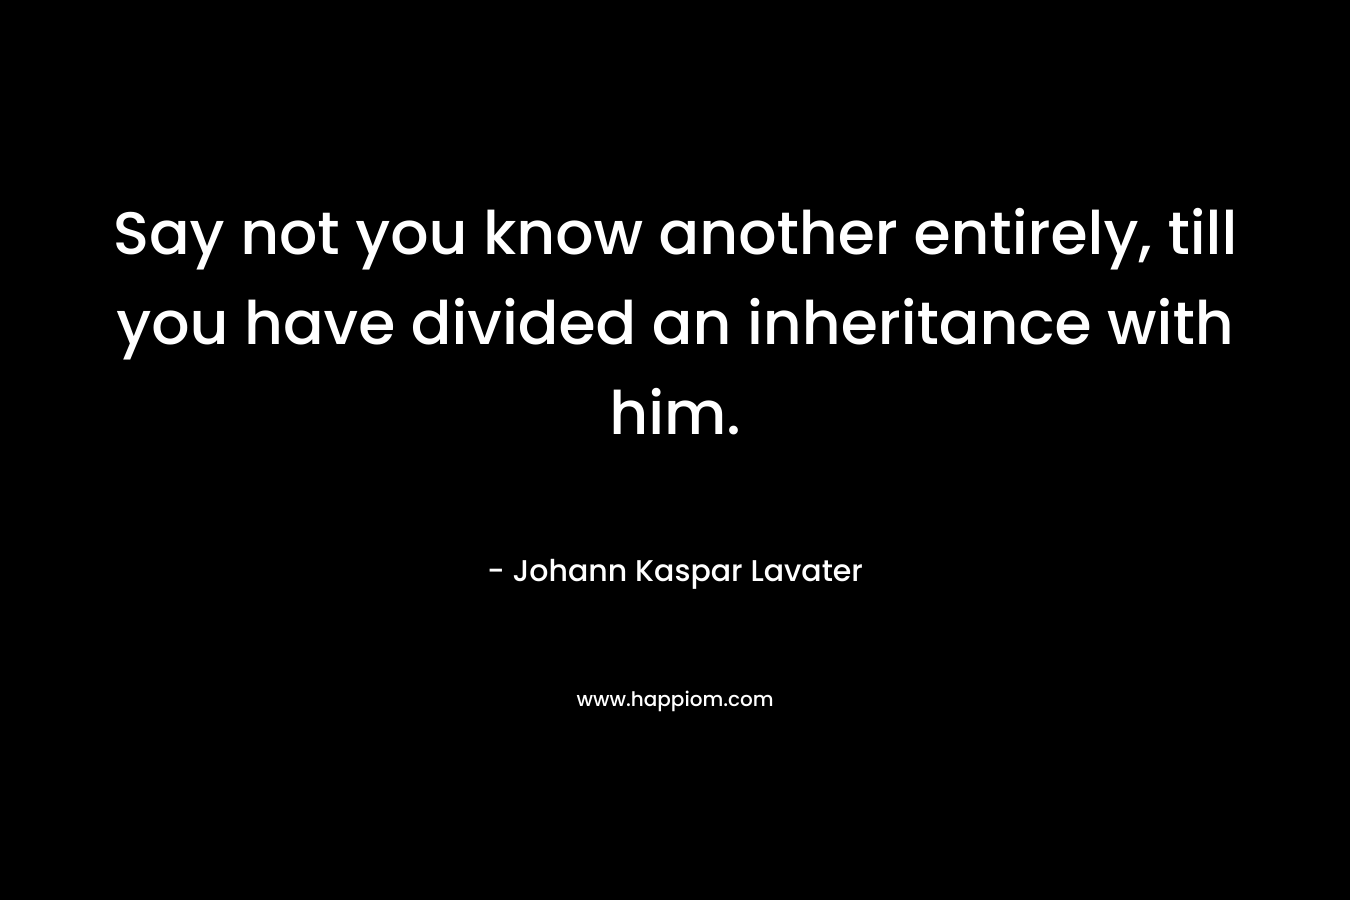 Say not you know another entirely, till you have divided an inheritance with him.